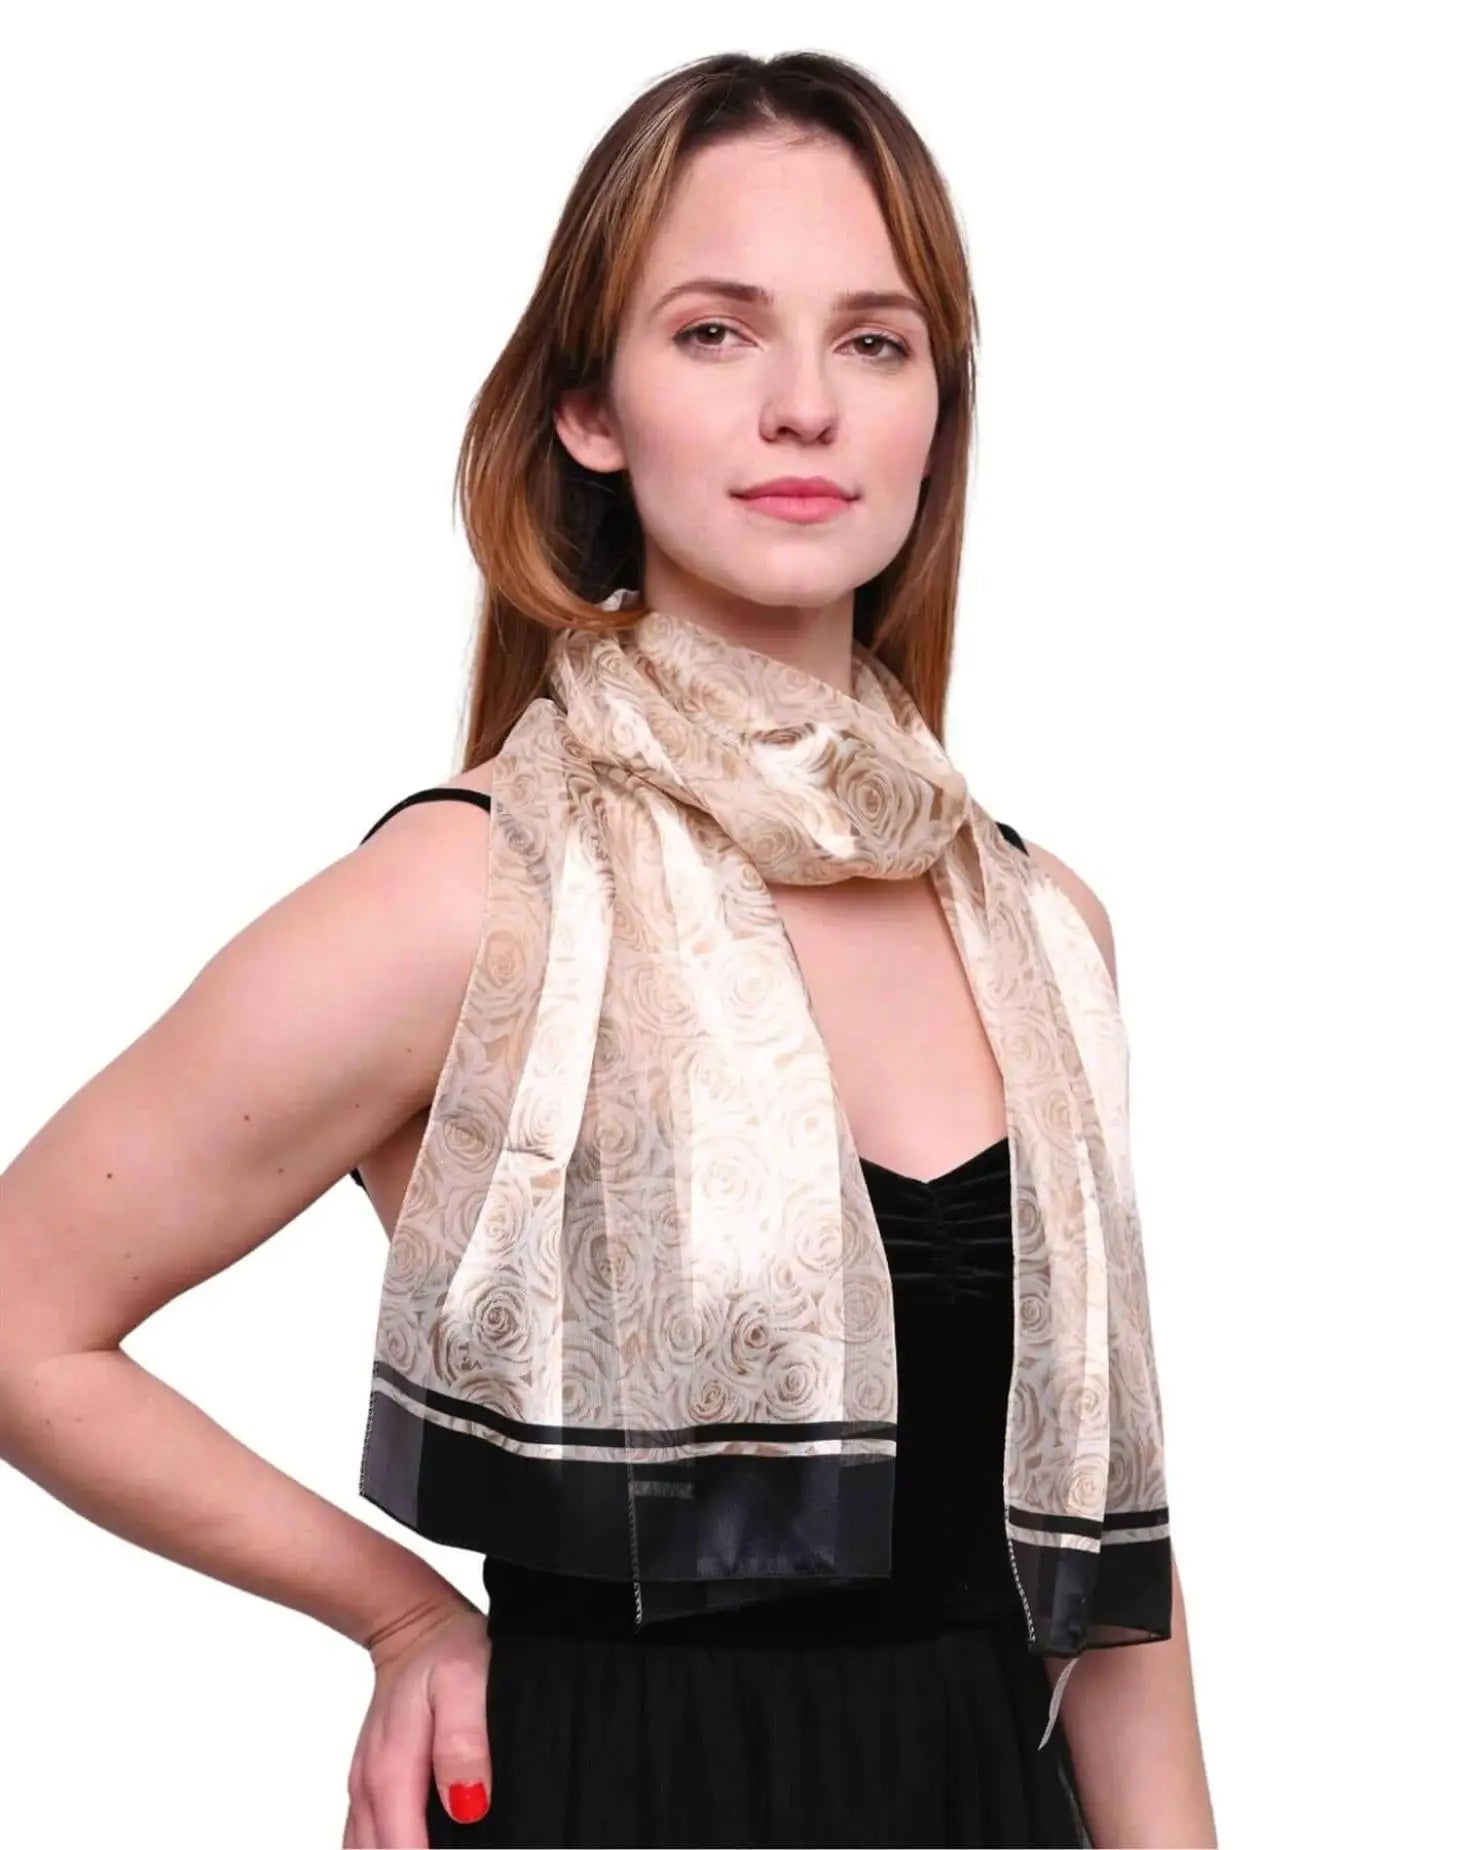 Rose print scarf with black and white pattern worn by a woman